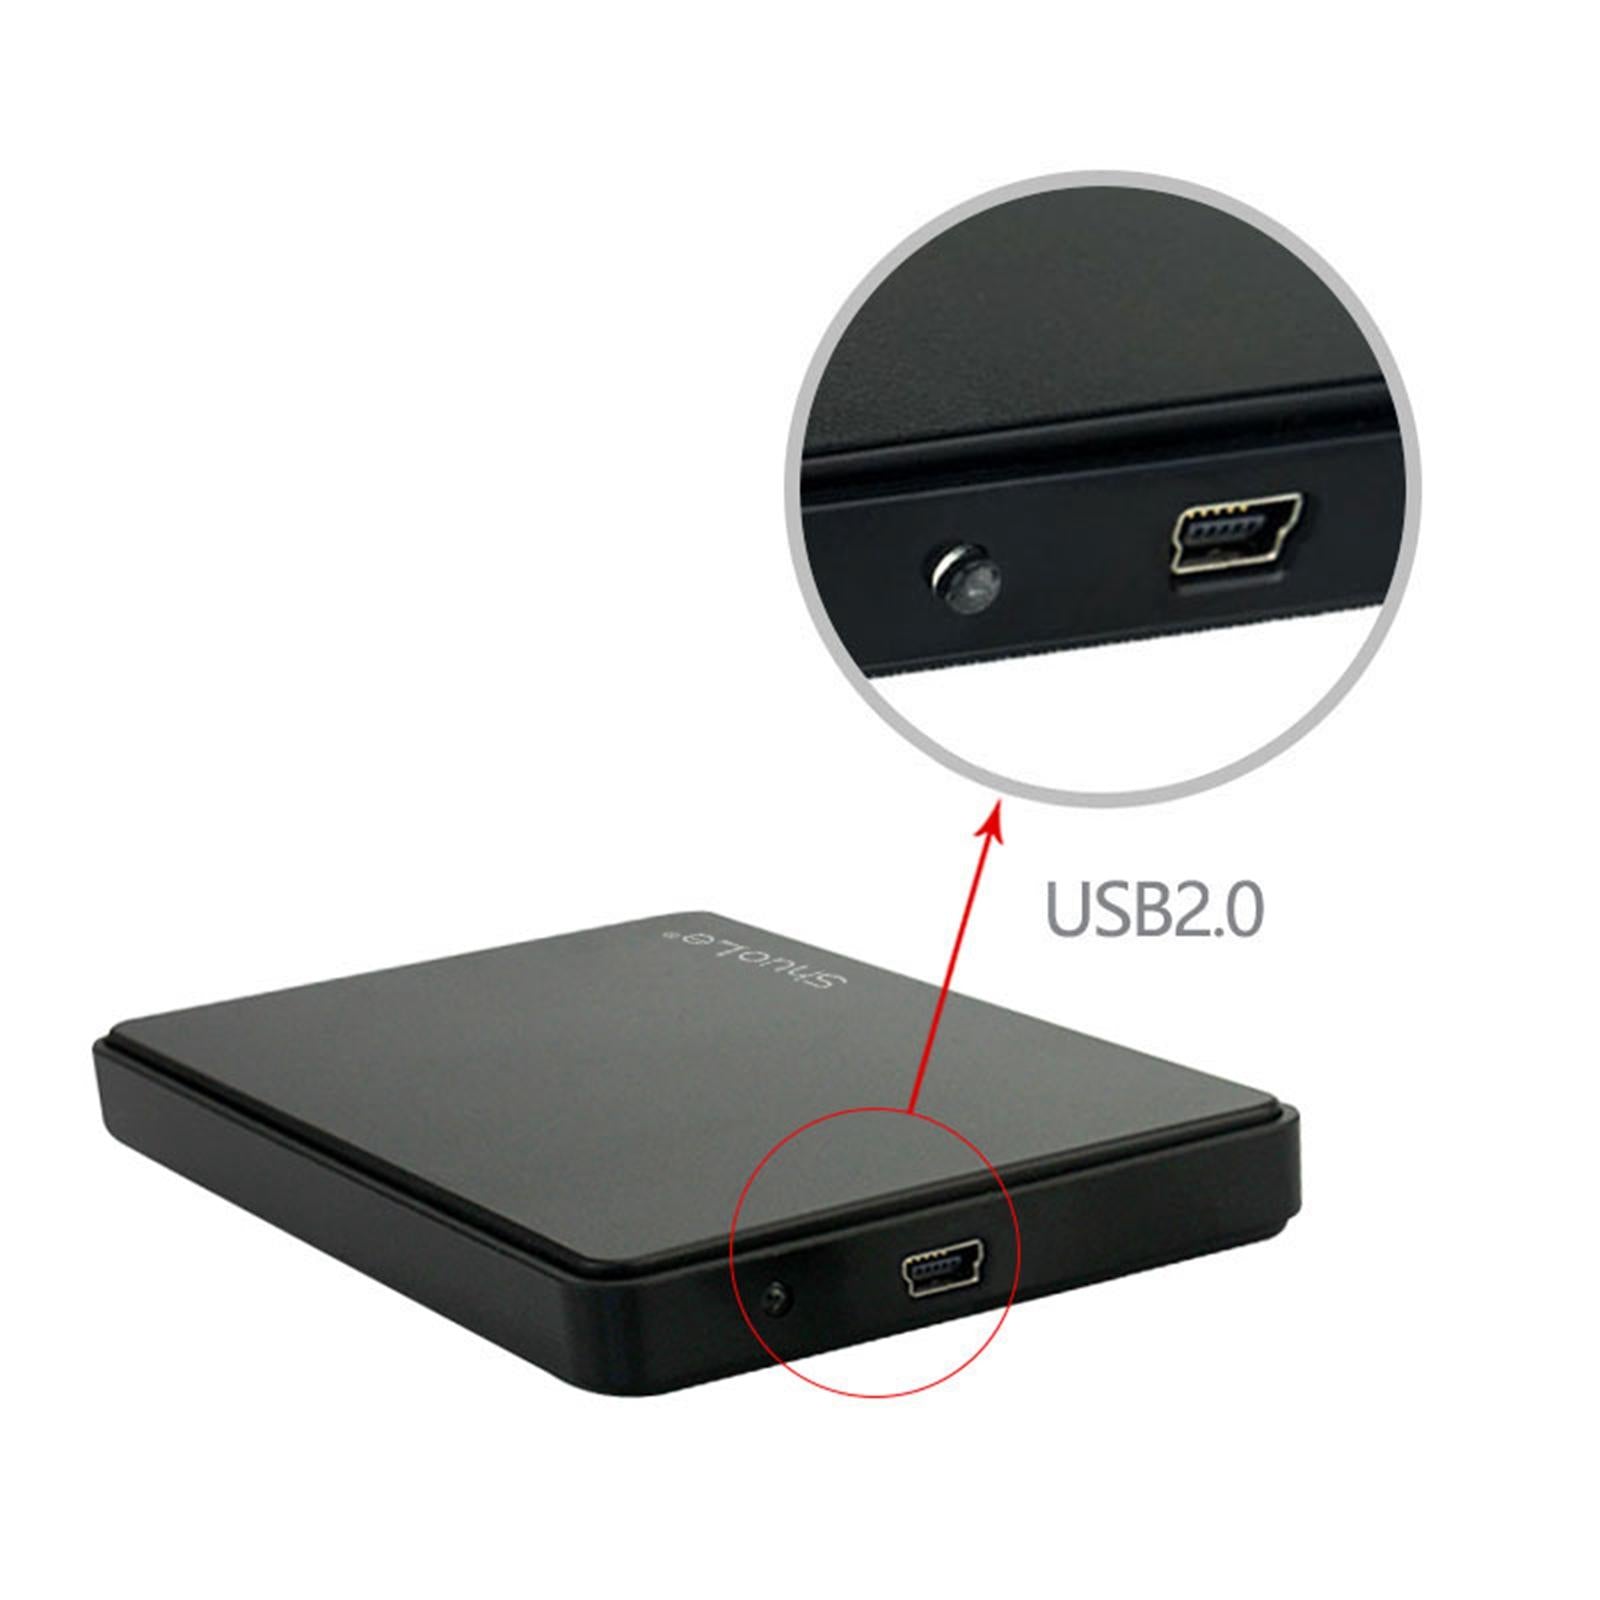 Portable External Hard Drive Protective Cover for USB 2.0 2TB Laptop for Mac Black